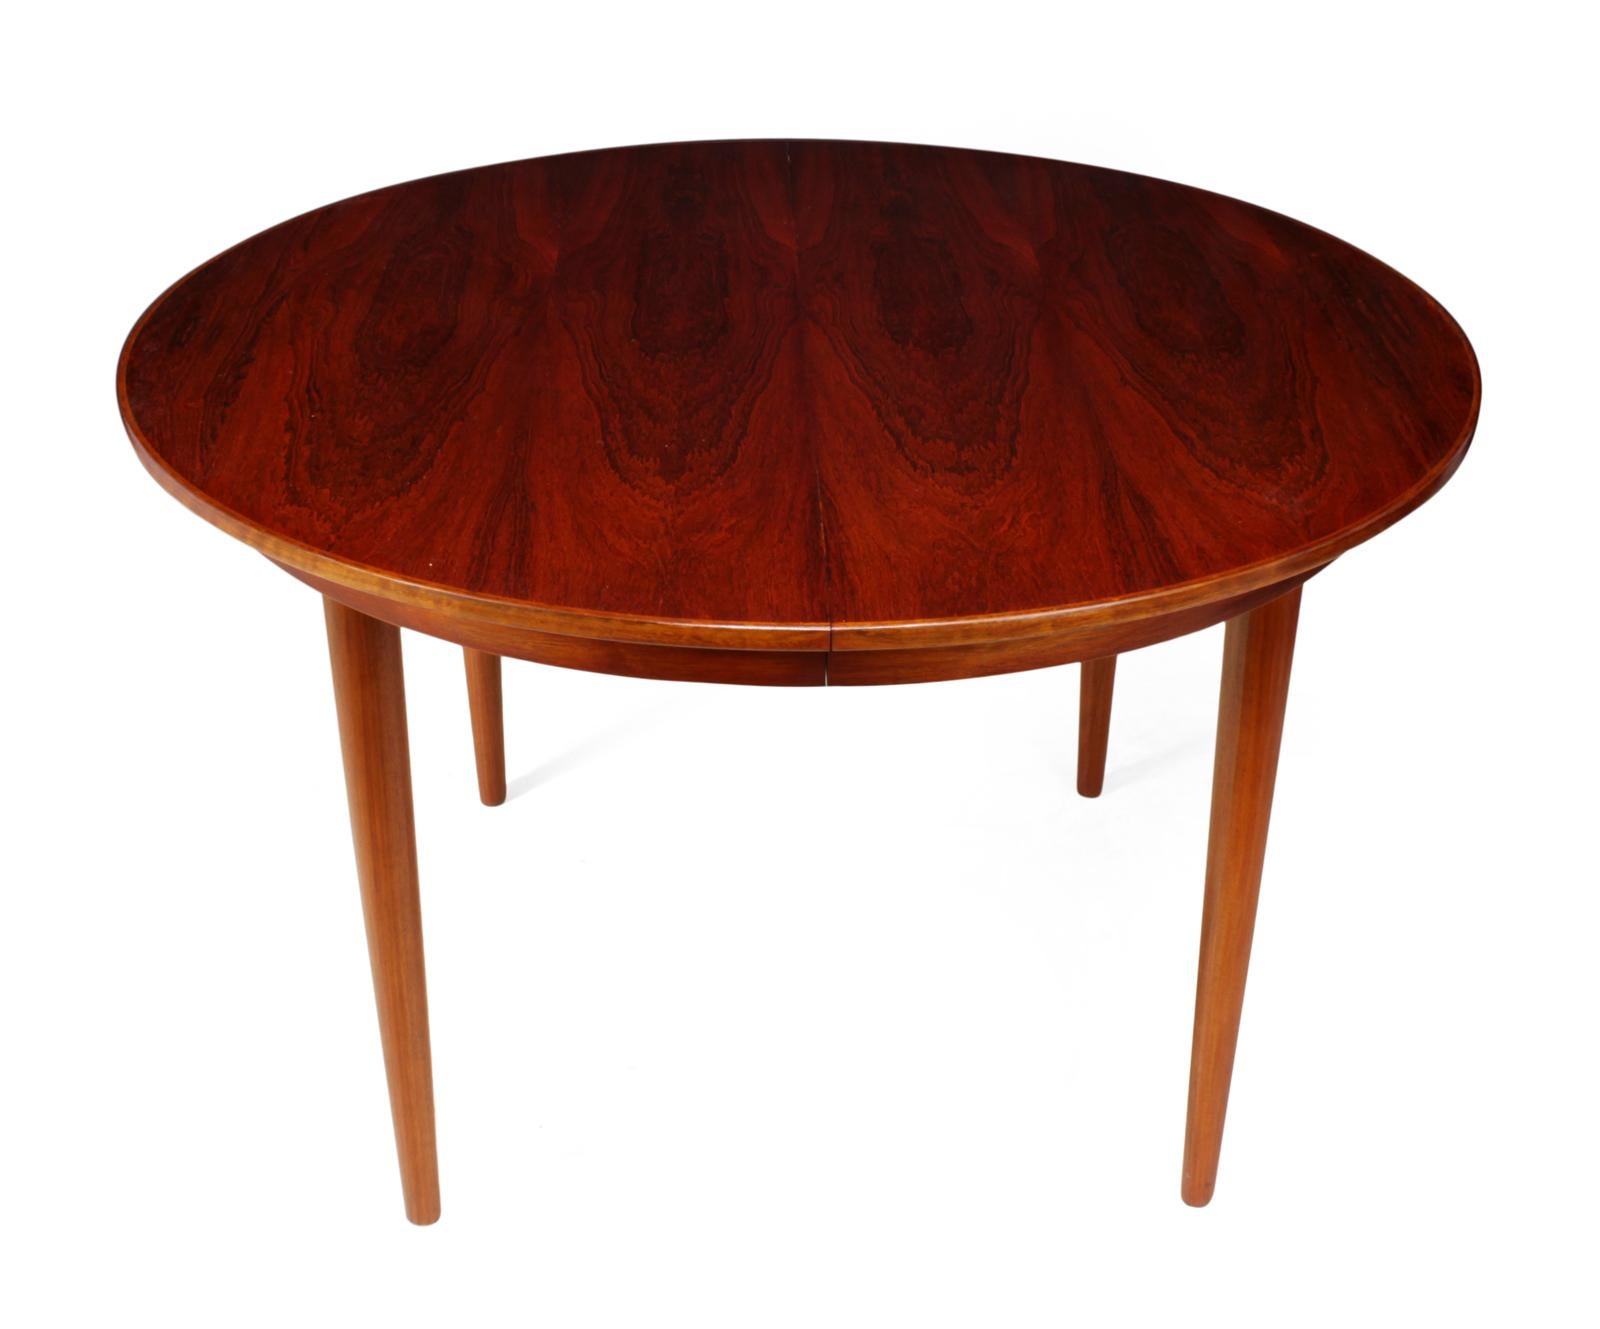 Danish rosewood dining table
This circular dining table has two extending leaves to seat 8 people each leaf is 50cm wide the table has been professionally hand polished and is in excellent conditioned

Age: 1960

Style: Mid-Century